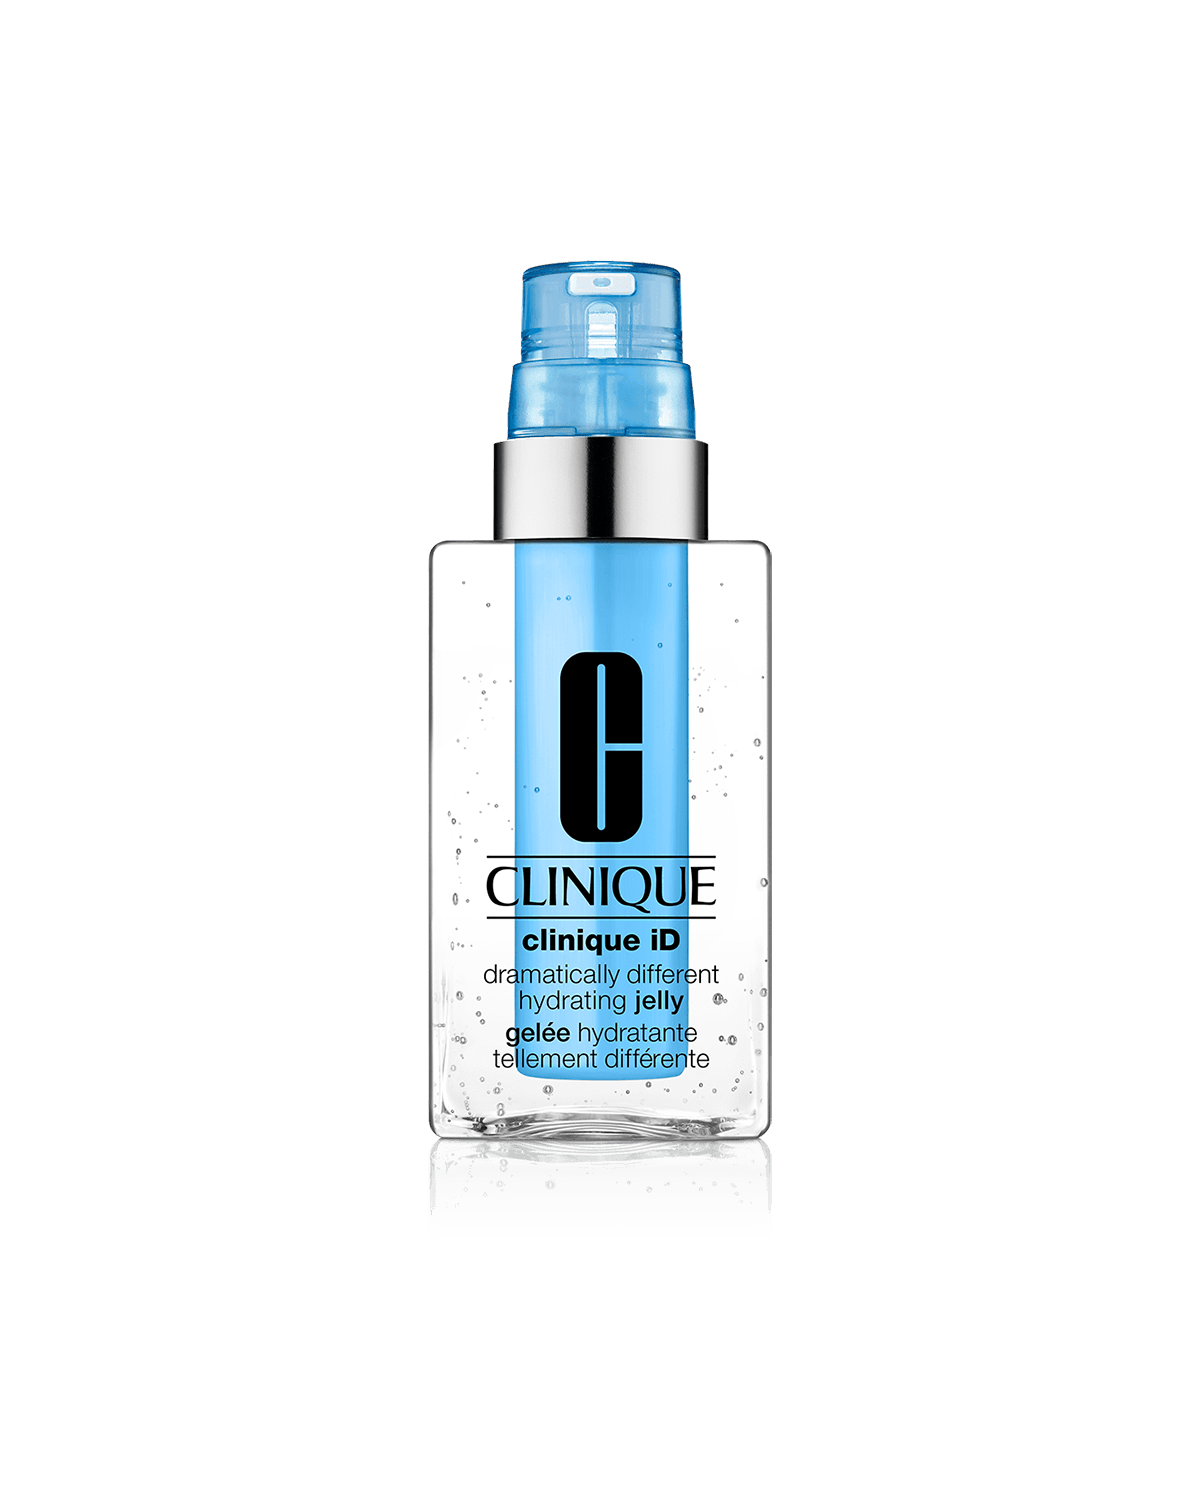 Clinique iD™: Dramatically Different Hydrating Jelly ™ + Active Cartridge Concentrate for Uneven Skin Tone